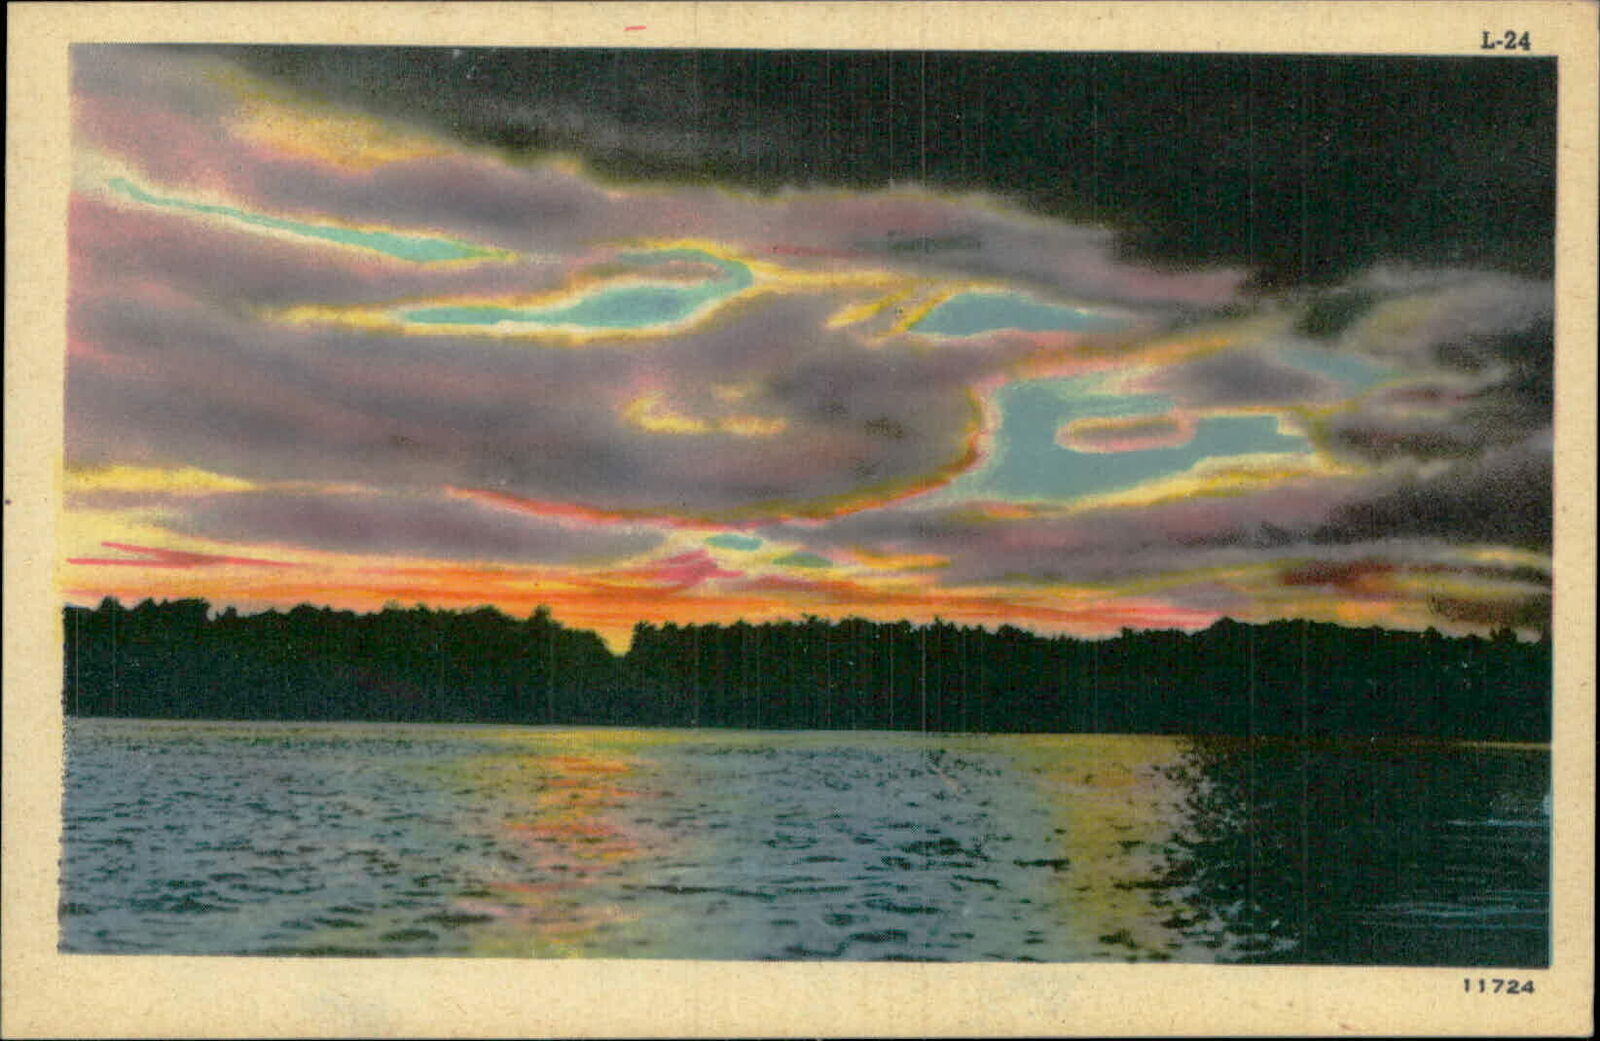 Postcard: Artist Rendition of night Sky over Country lake scene